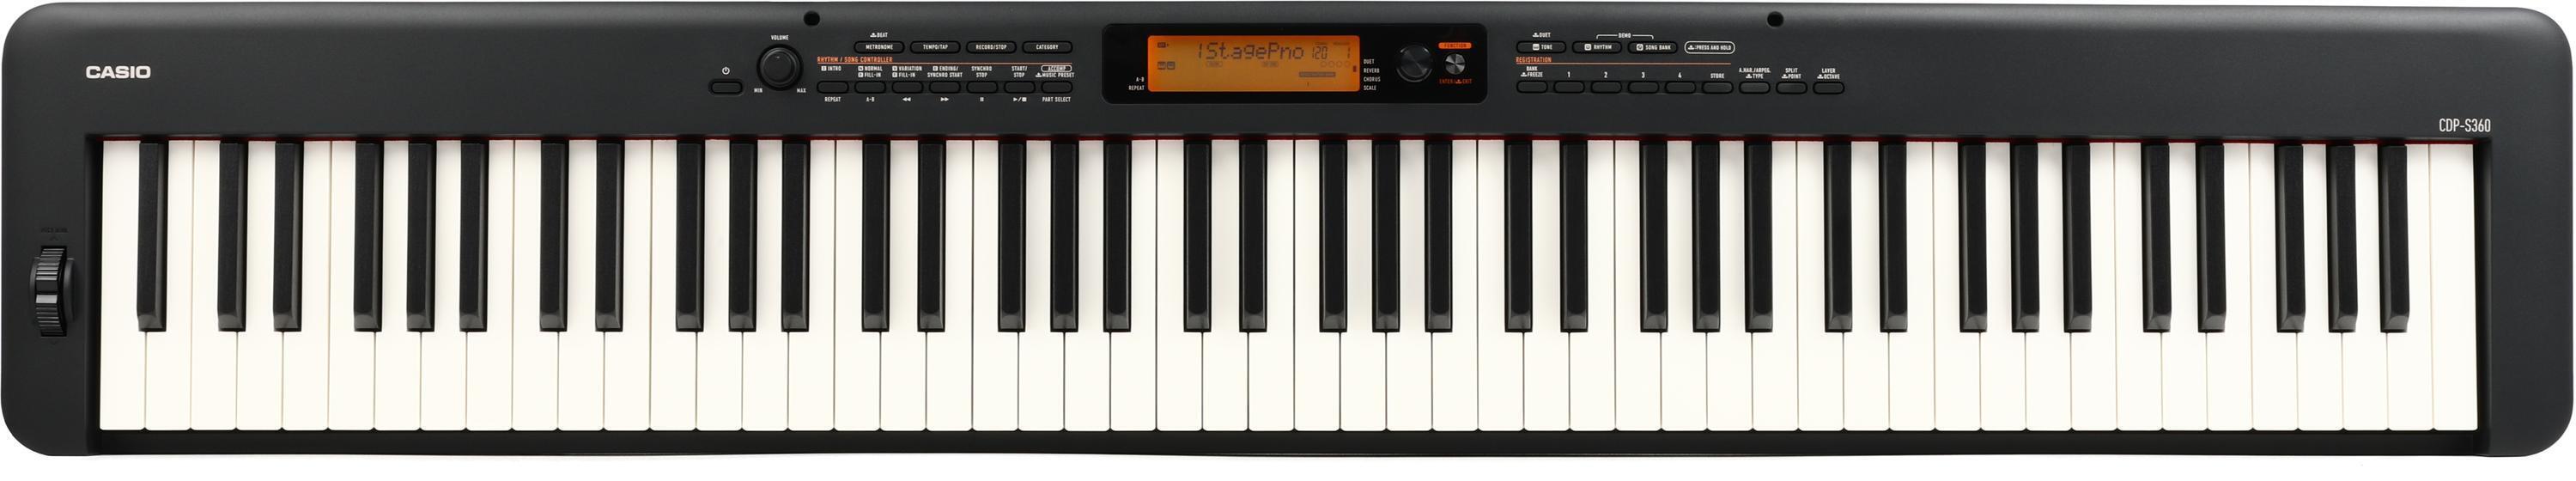 Casio Privia PX-120 | Sweetwater